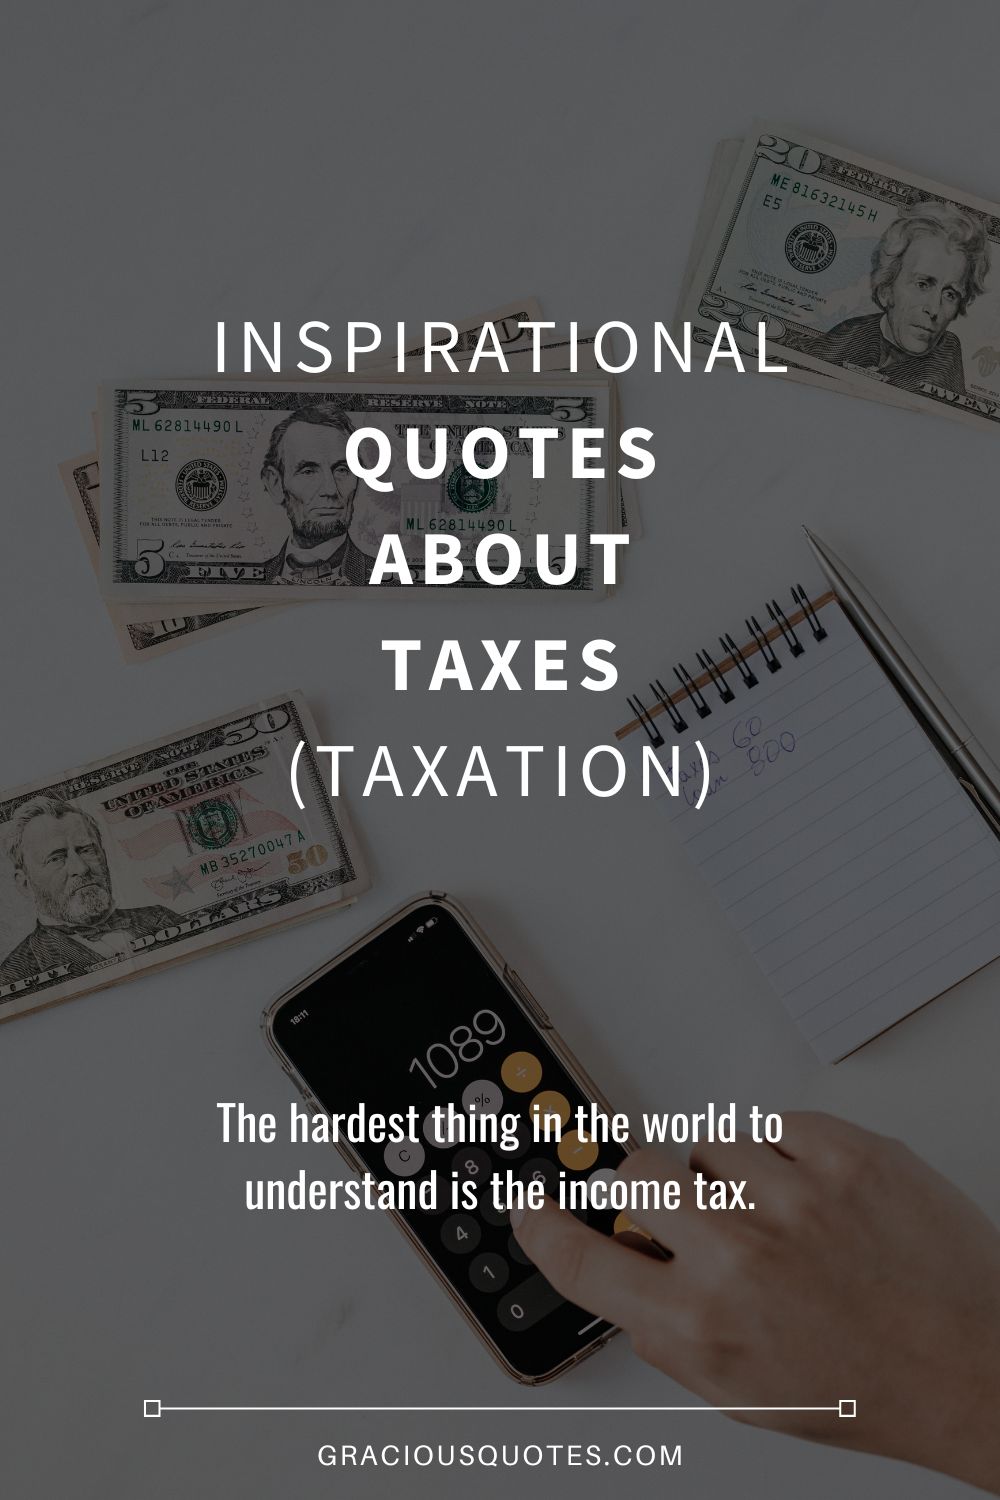 Inspirational Quotes About Taxes (TAXATION) - Gracious Quotes